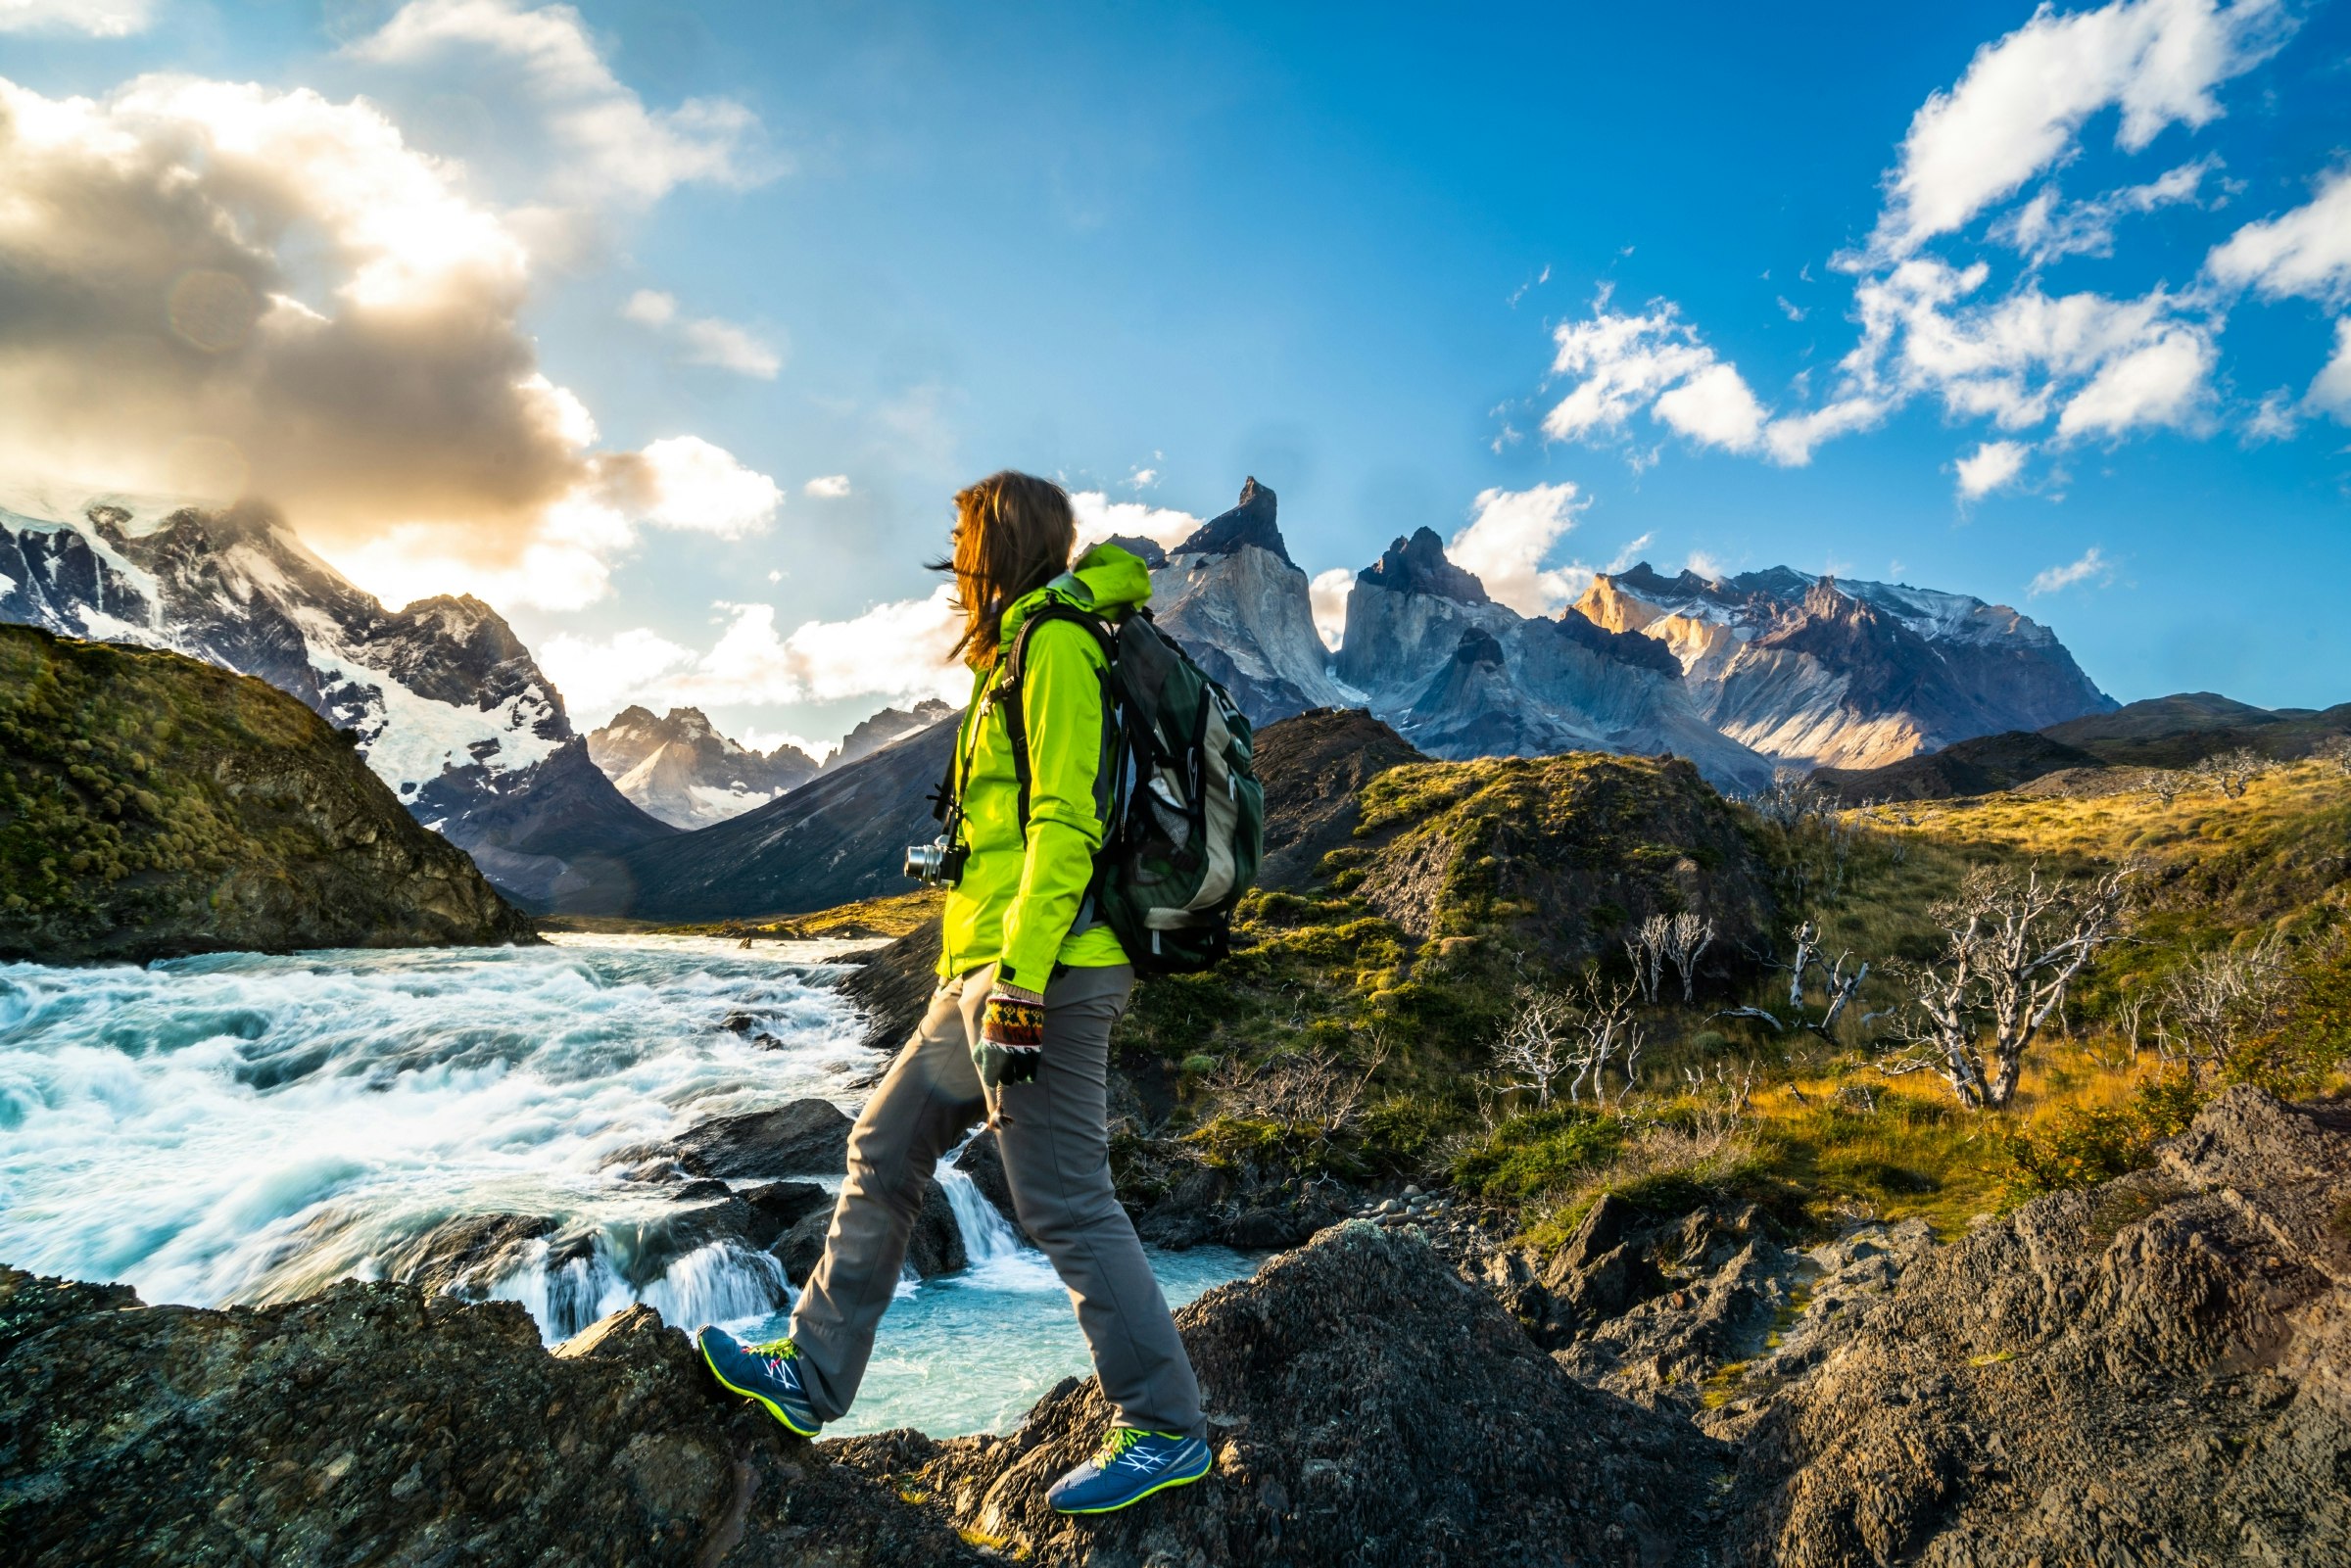 A female hiker walking on rocky ground near Salto Grande Waterfall in Torres del Paine National Park, Chile. In the background numerous snowy mountains are visible.